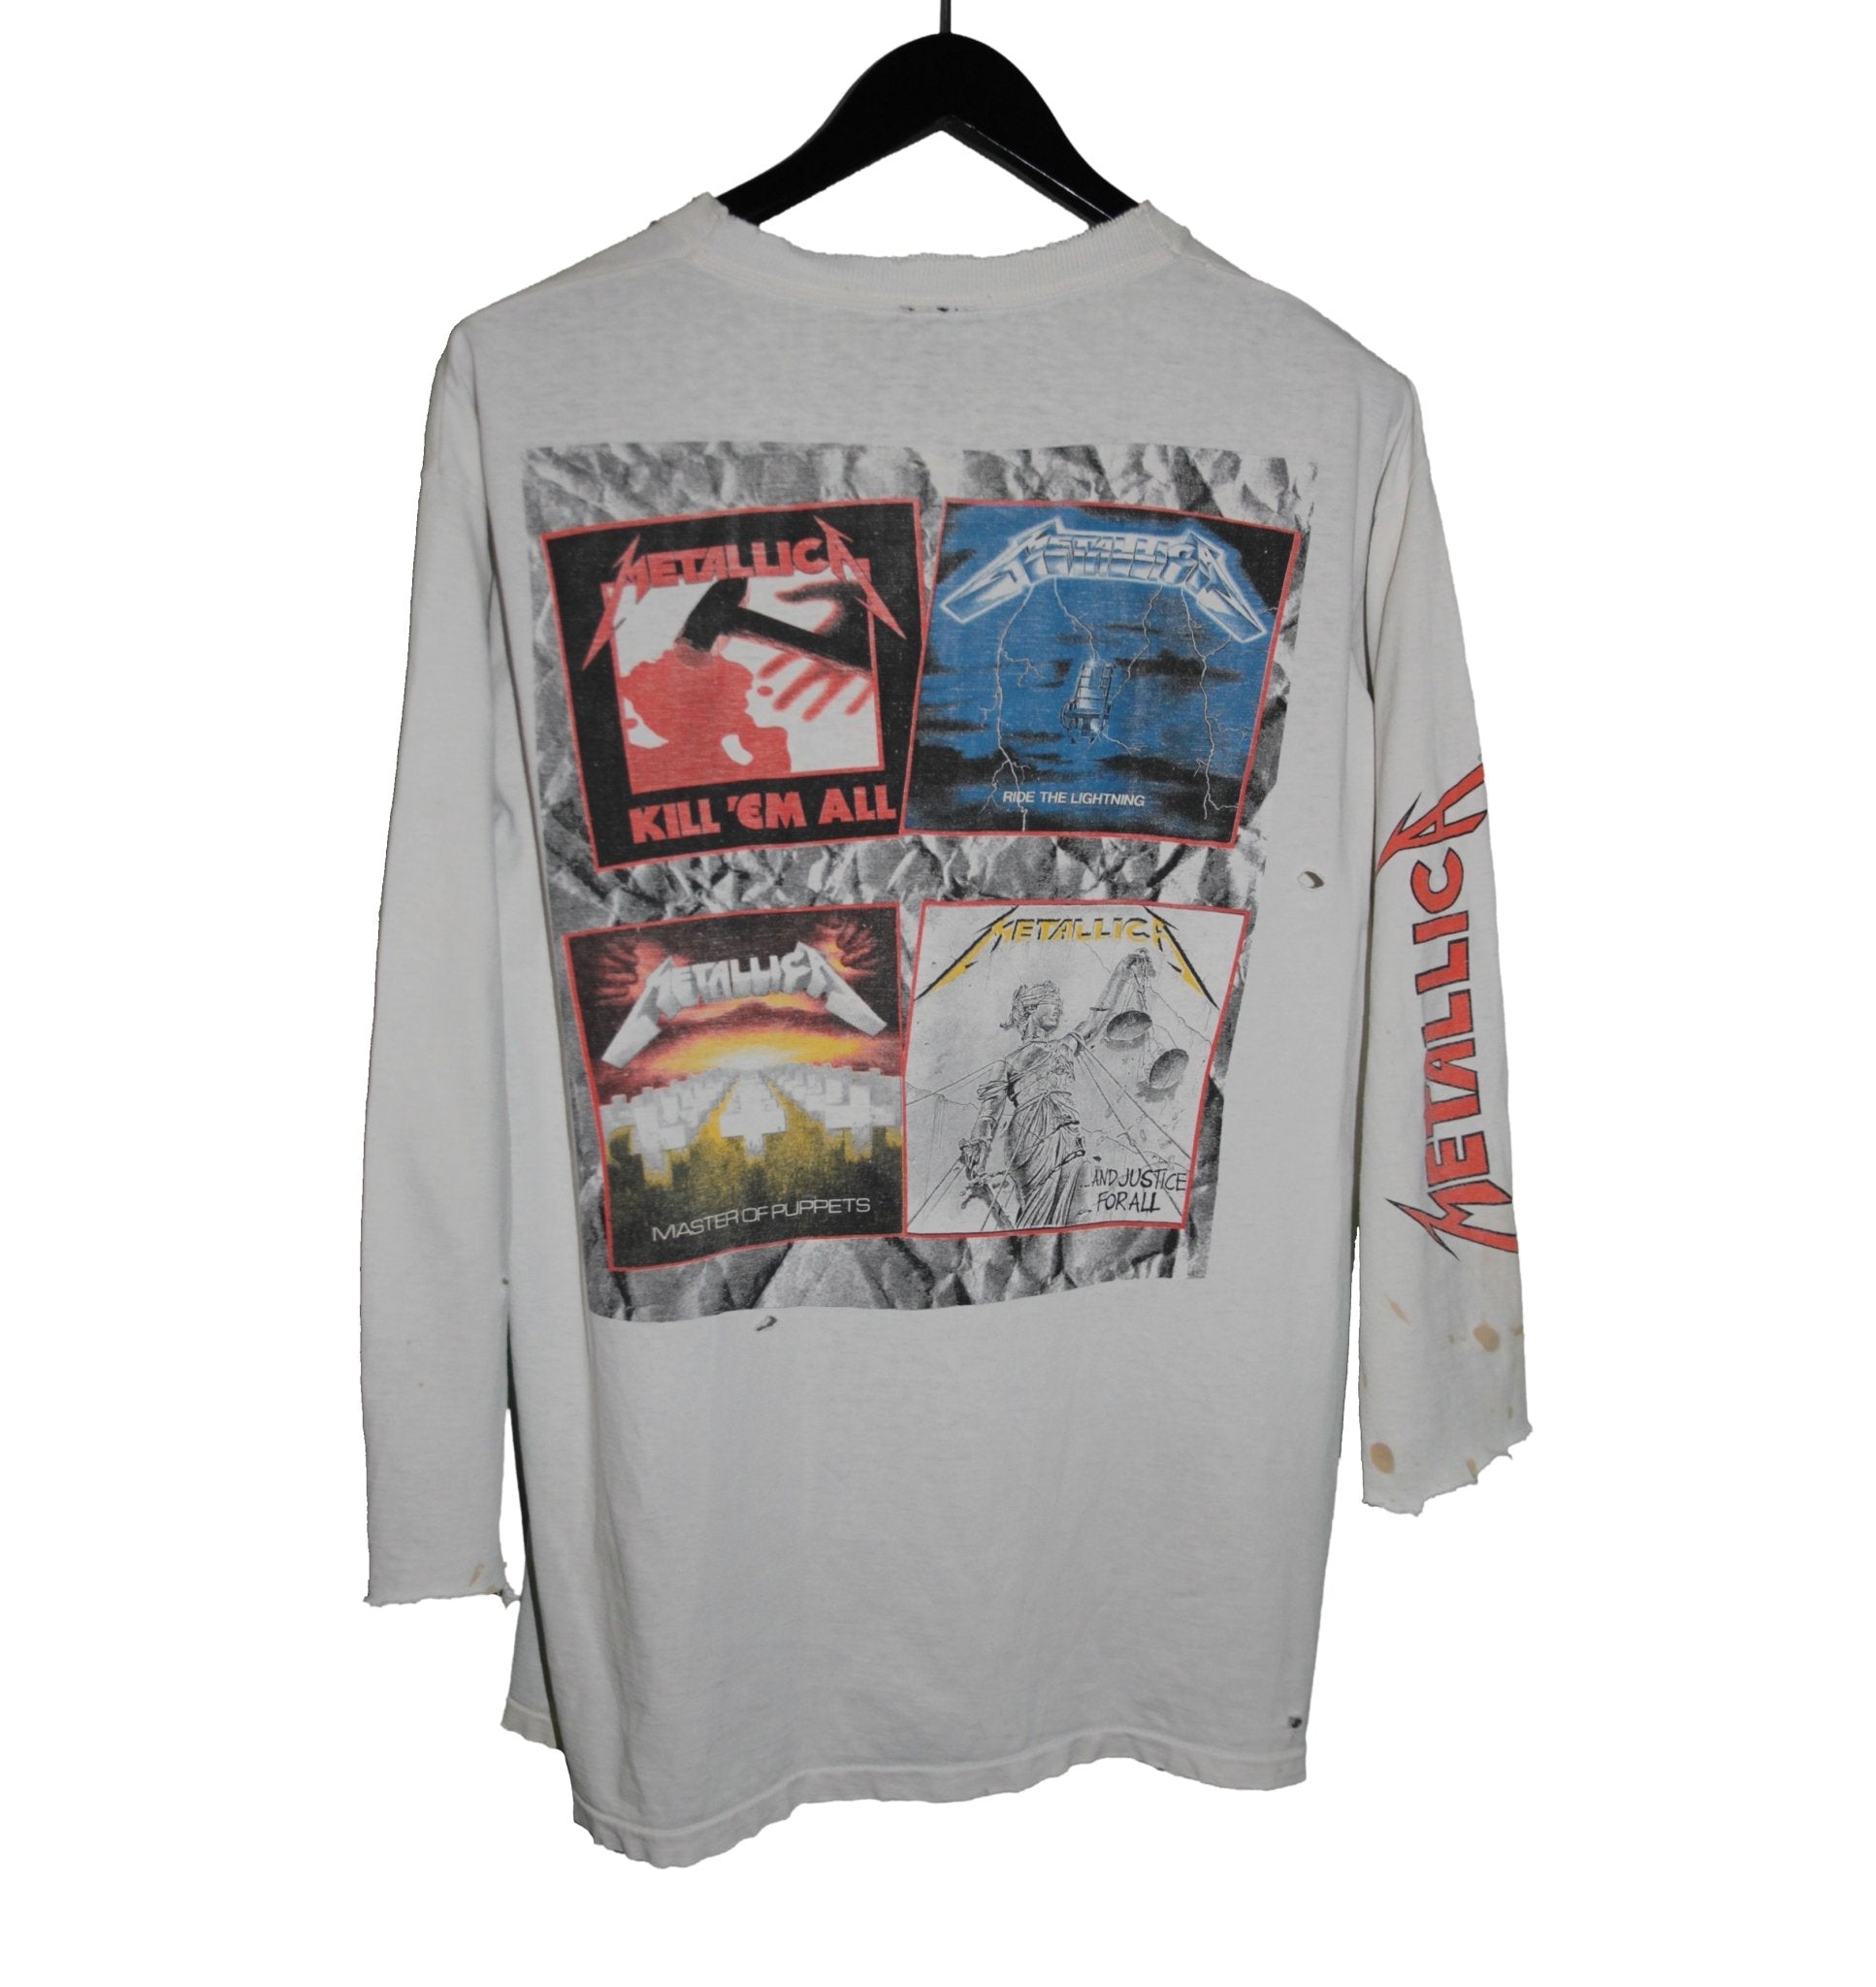 Metallica 1988 And Justice For All Longsleeve Shirt - Faded AU